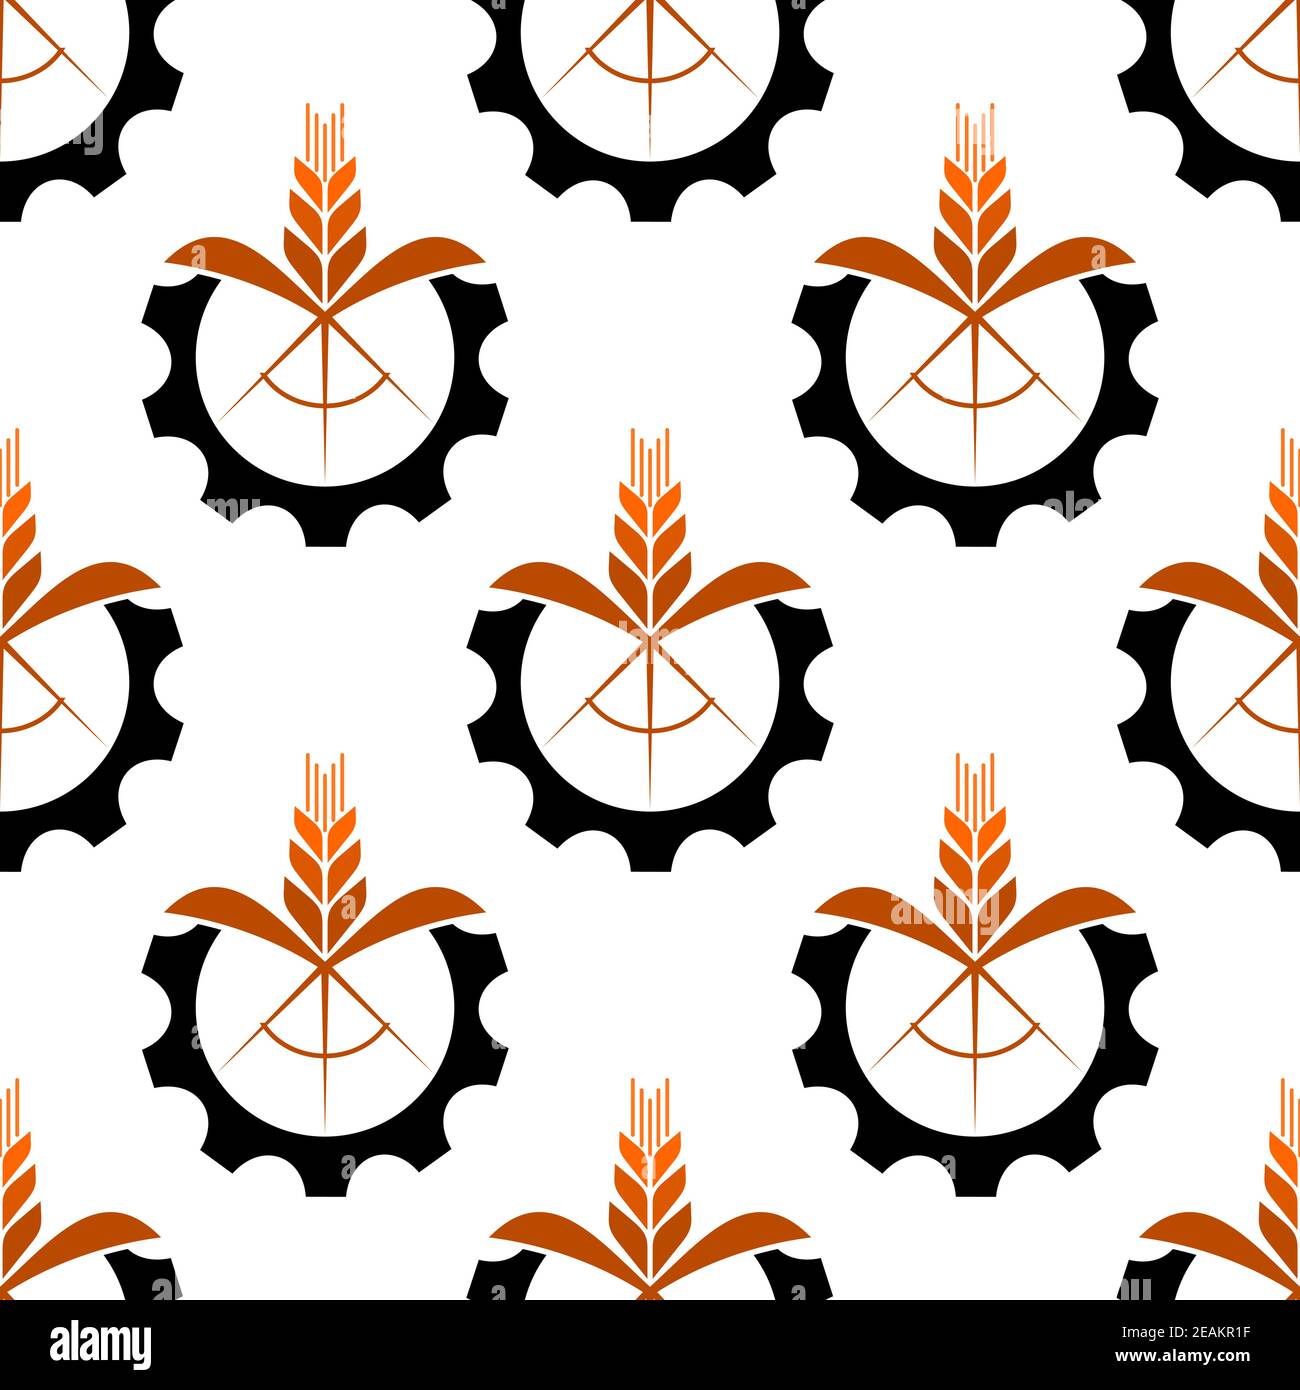 Wheat Stalk With A Gear Wheel Icon Seamless Pattern For Conceptual